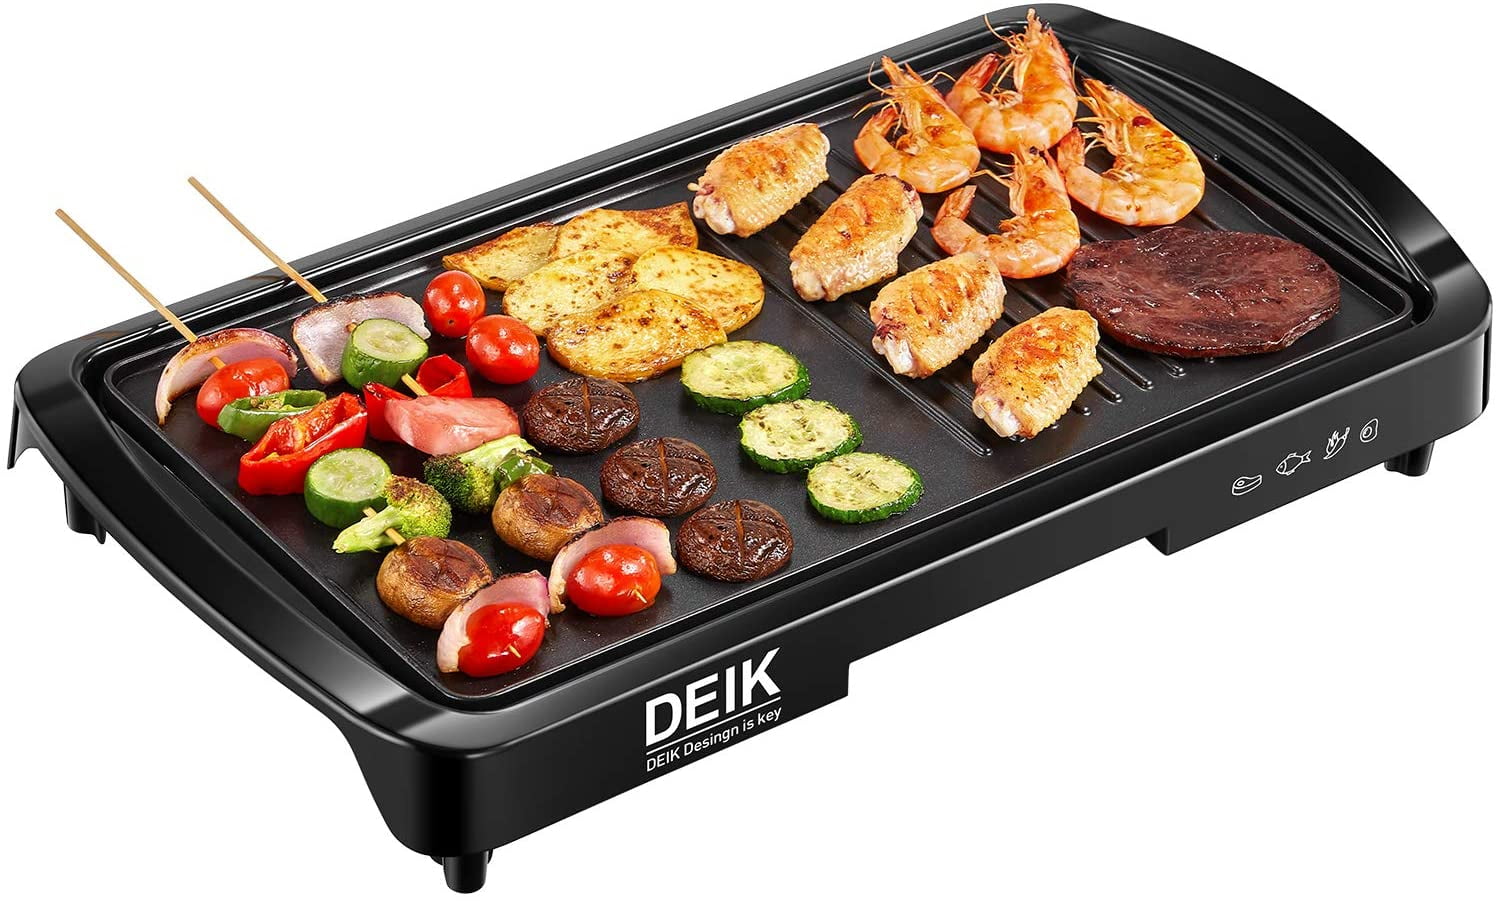 Electric Smokeless Indoor Griddle, 2-in-1 with Lid Grill, 1200W Home w/ Hood BBQ Grill, Nonstick Cooking Plate, 5 Level Adjustable Temperature